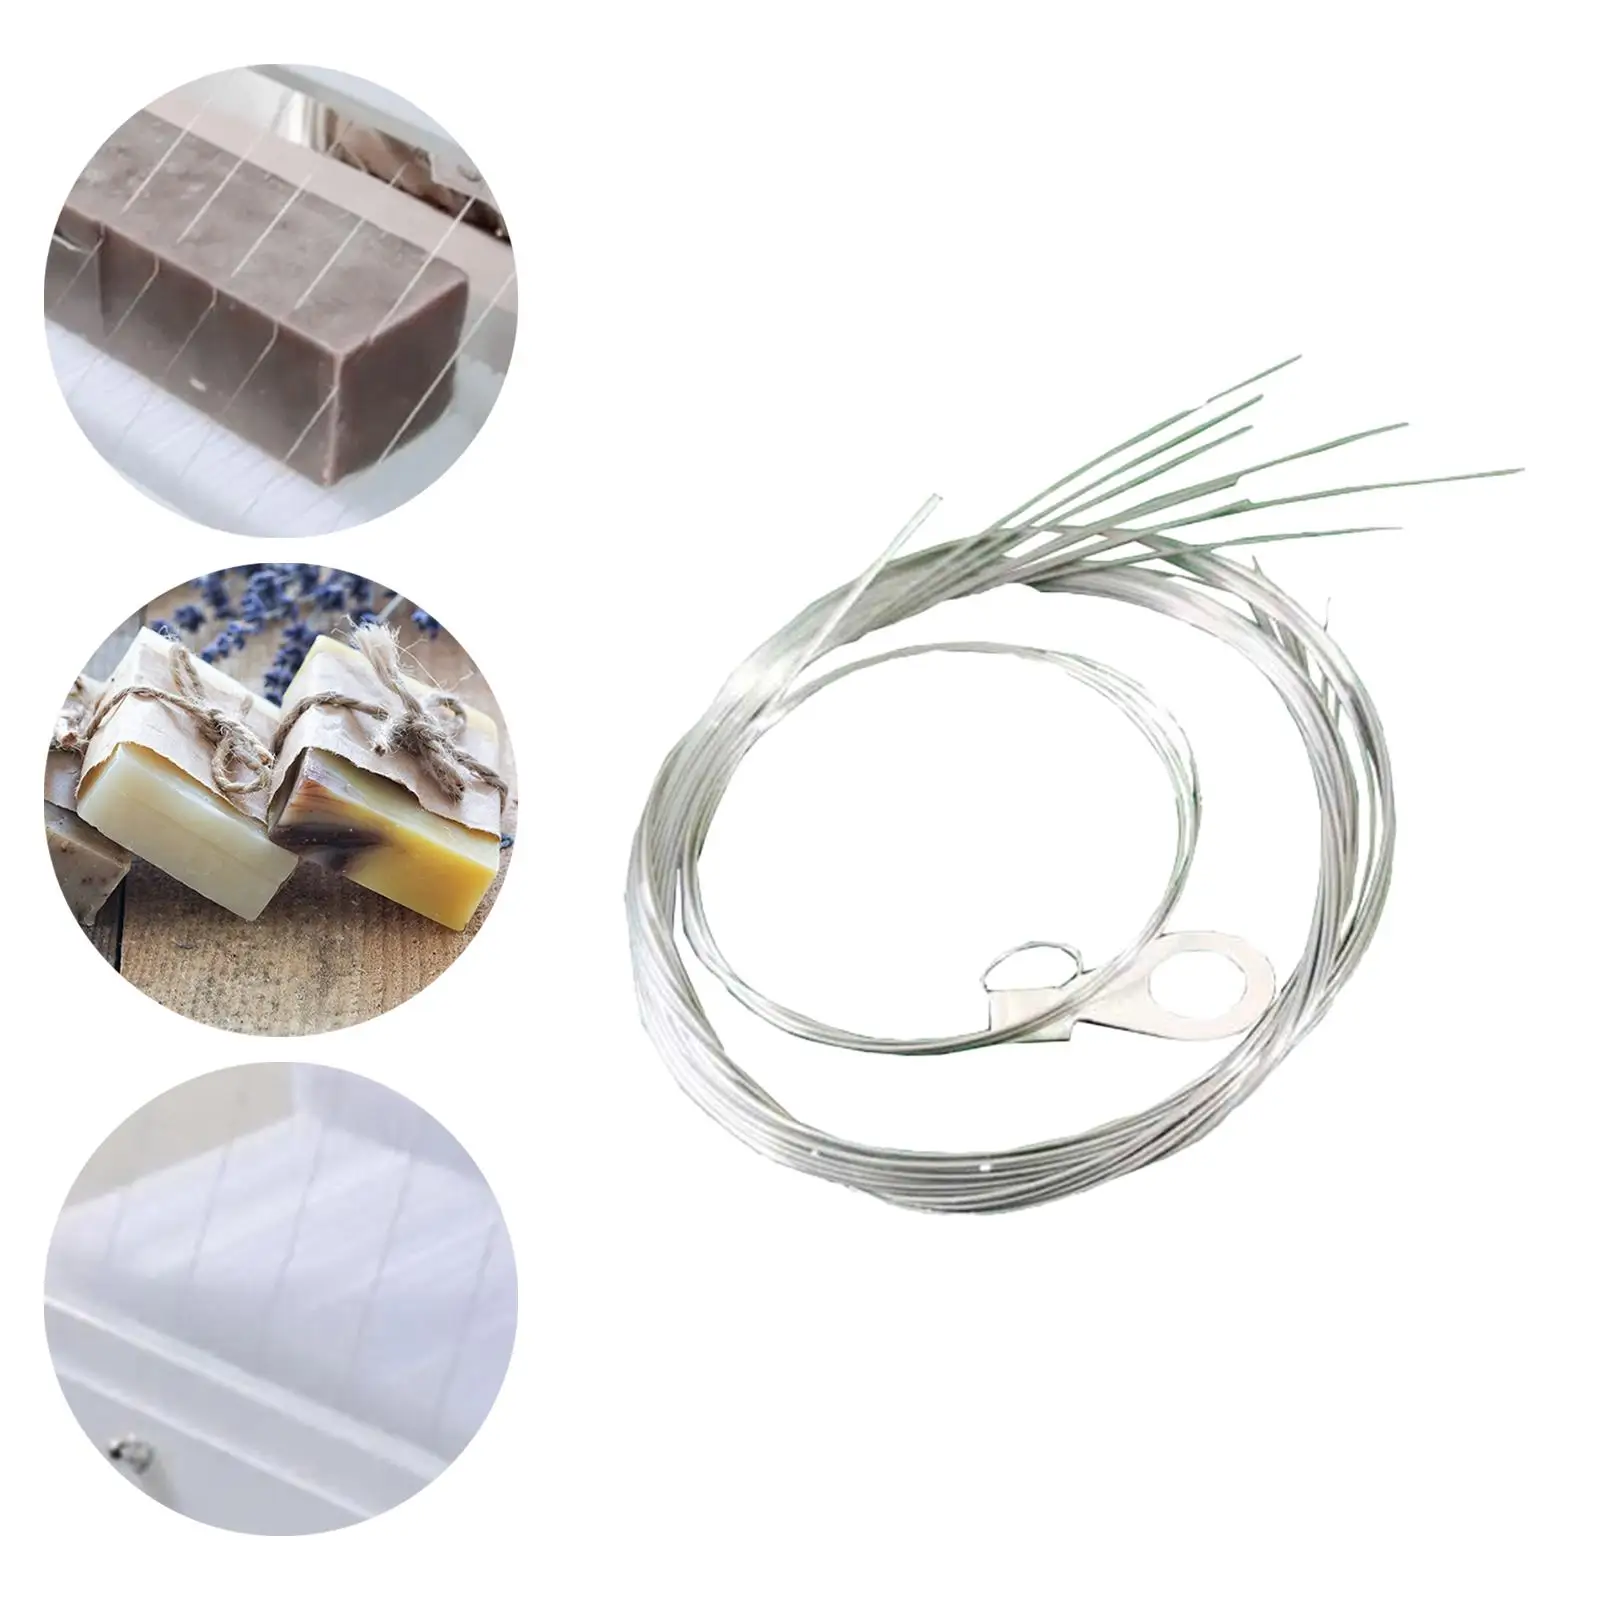 9 Pieces Soap Cutter Wires with Loop Cutting Stainless Steel Wire for Chocolate Butter Cake Soap Cutting Machine